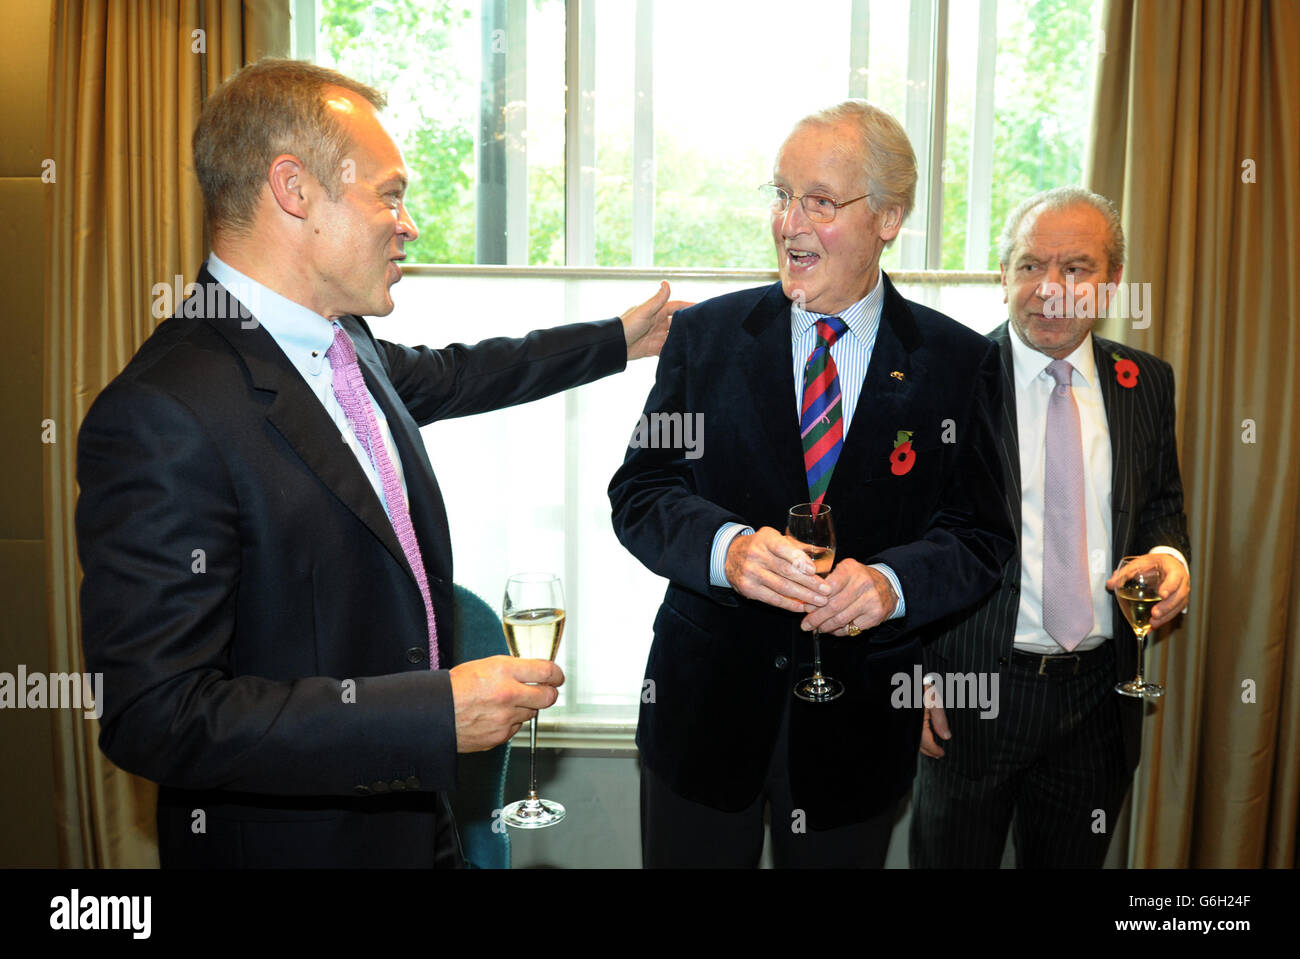 Guest of honour Graham Norton meets Nicholas Parsons (centre) and Lord Alan Sugar as he attends a tribute lunch hosted by The Lady Taverners at the Dorchester Hotel, London. Stock Photo